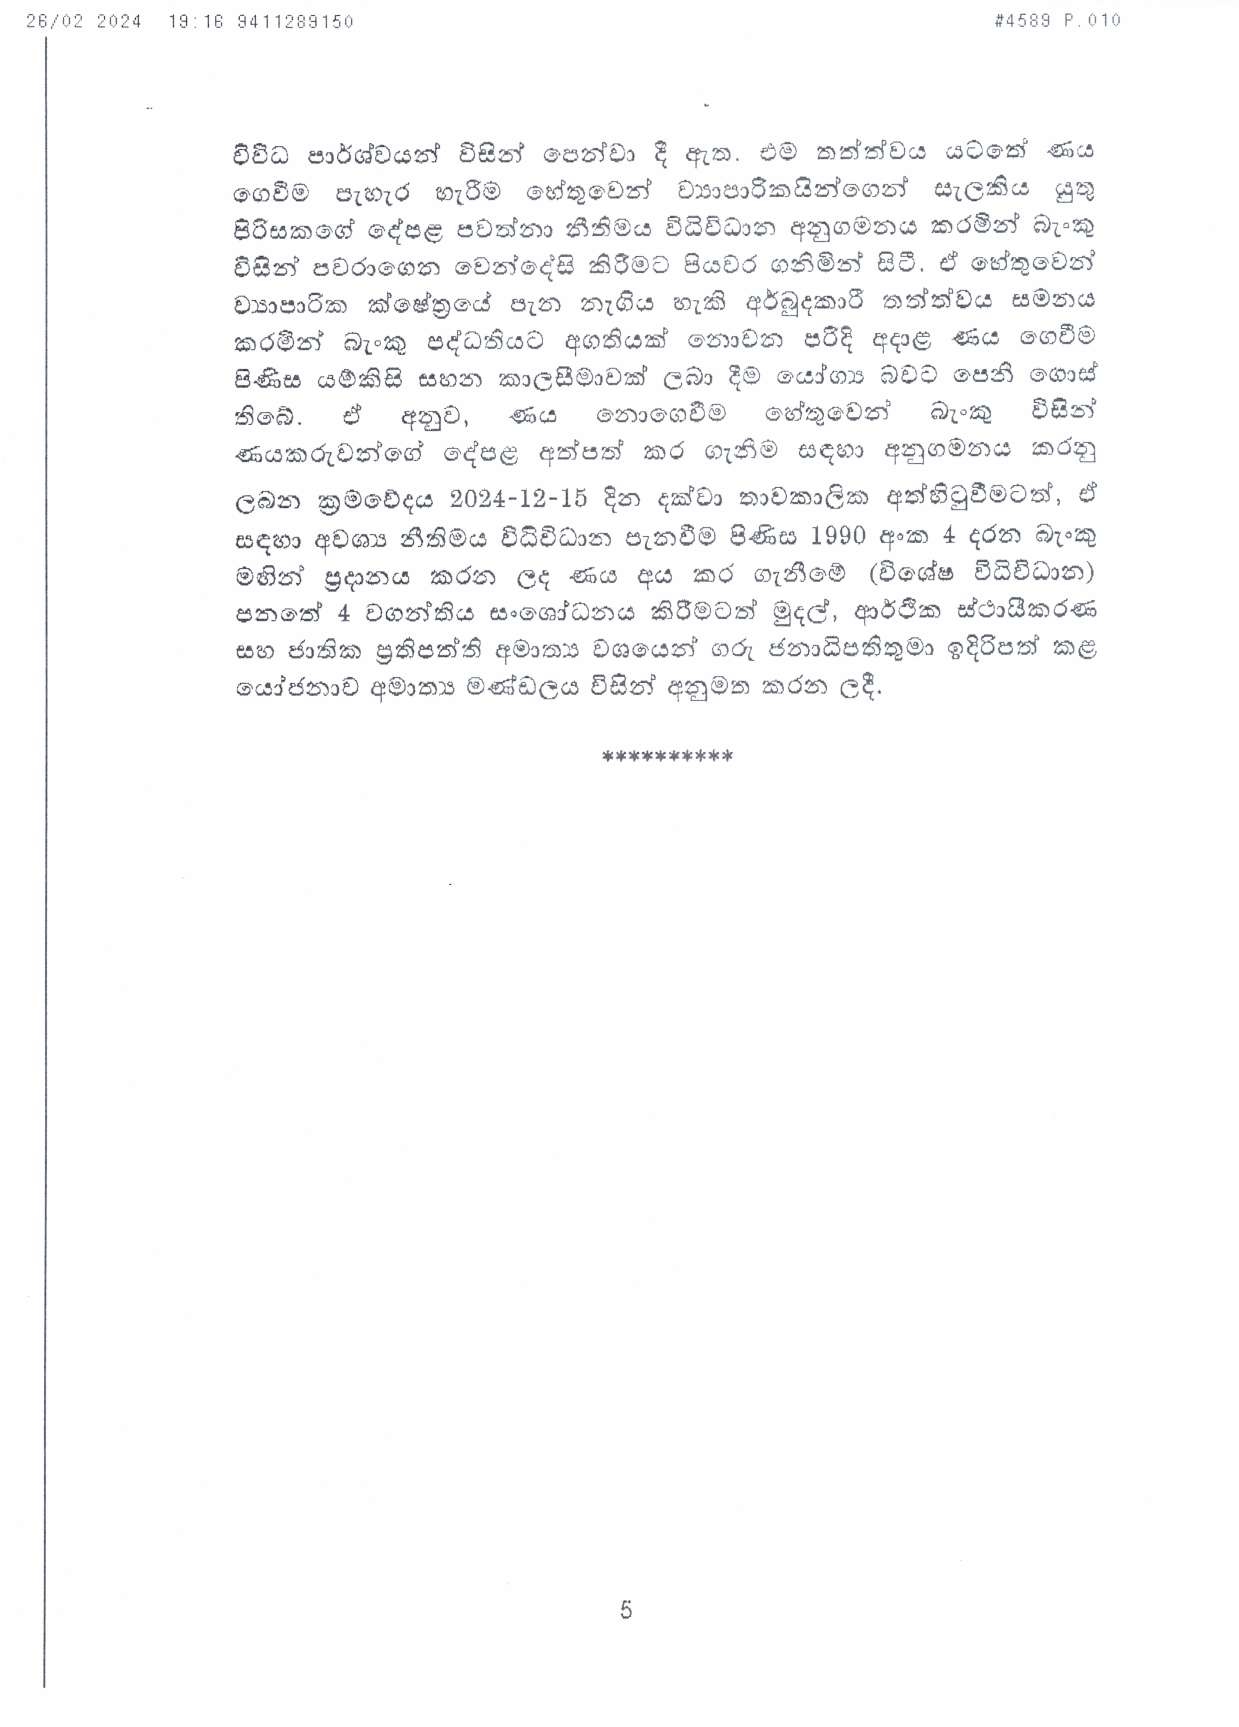 Cabinet Decision on 26.02.2024 page 00051